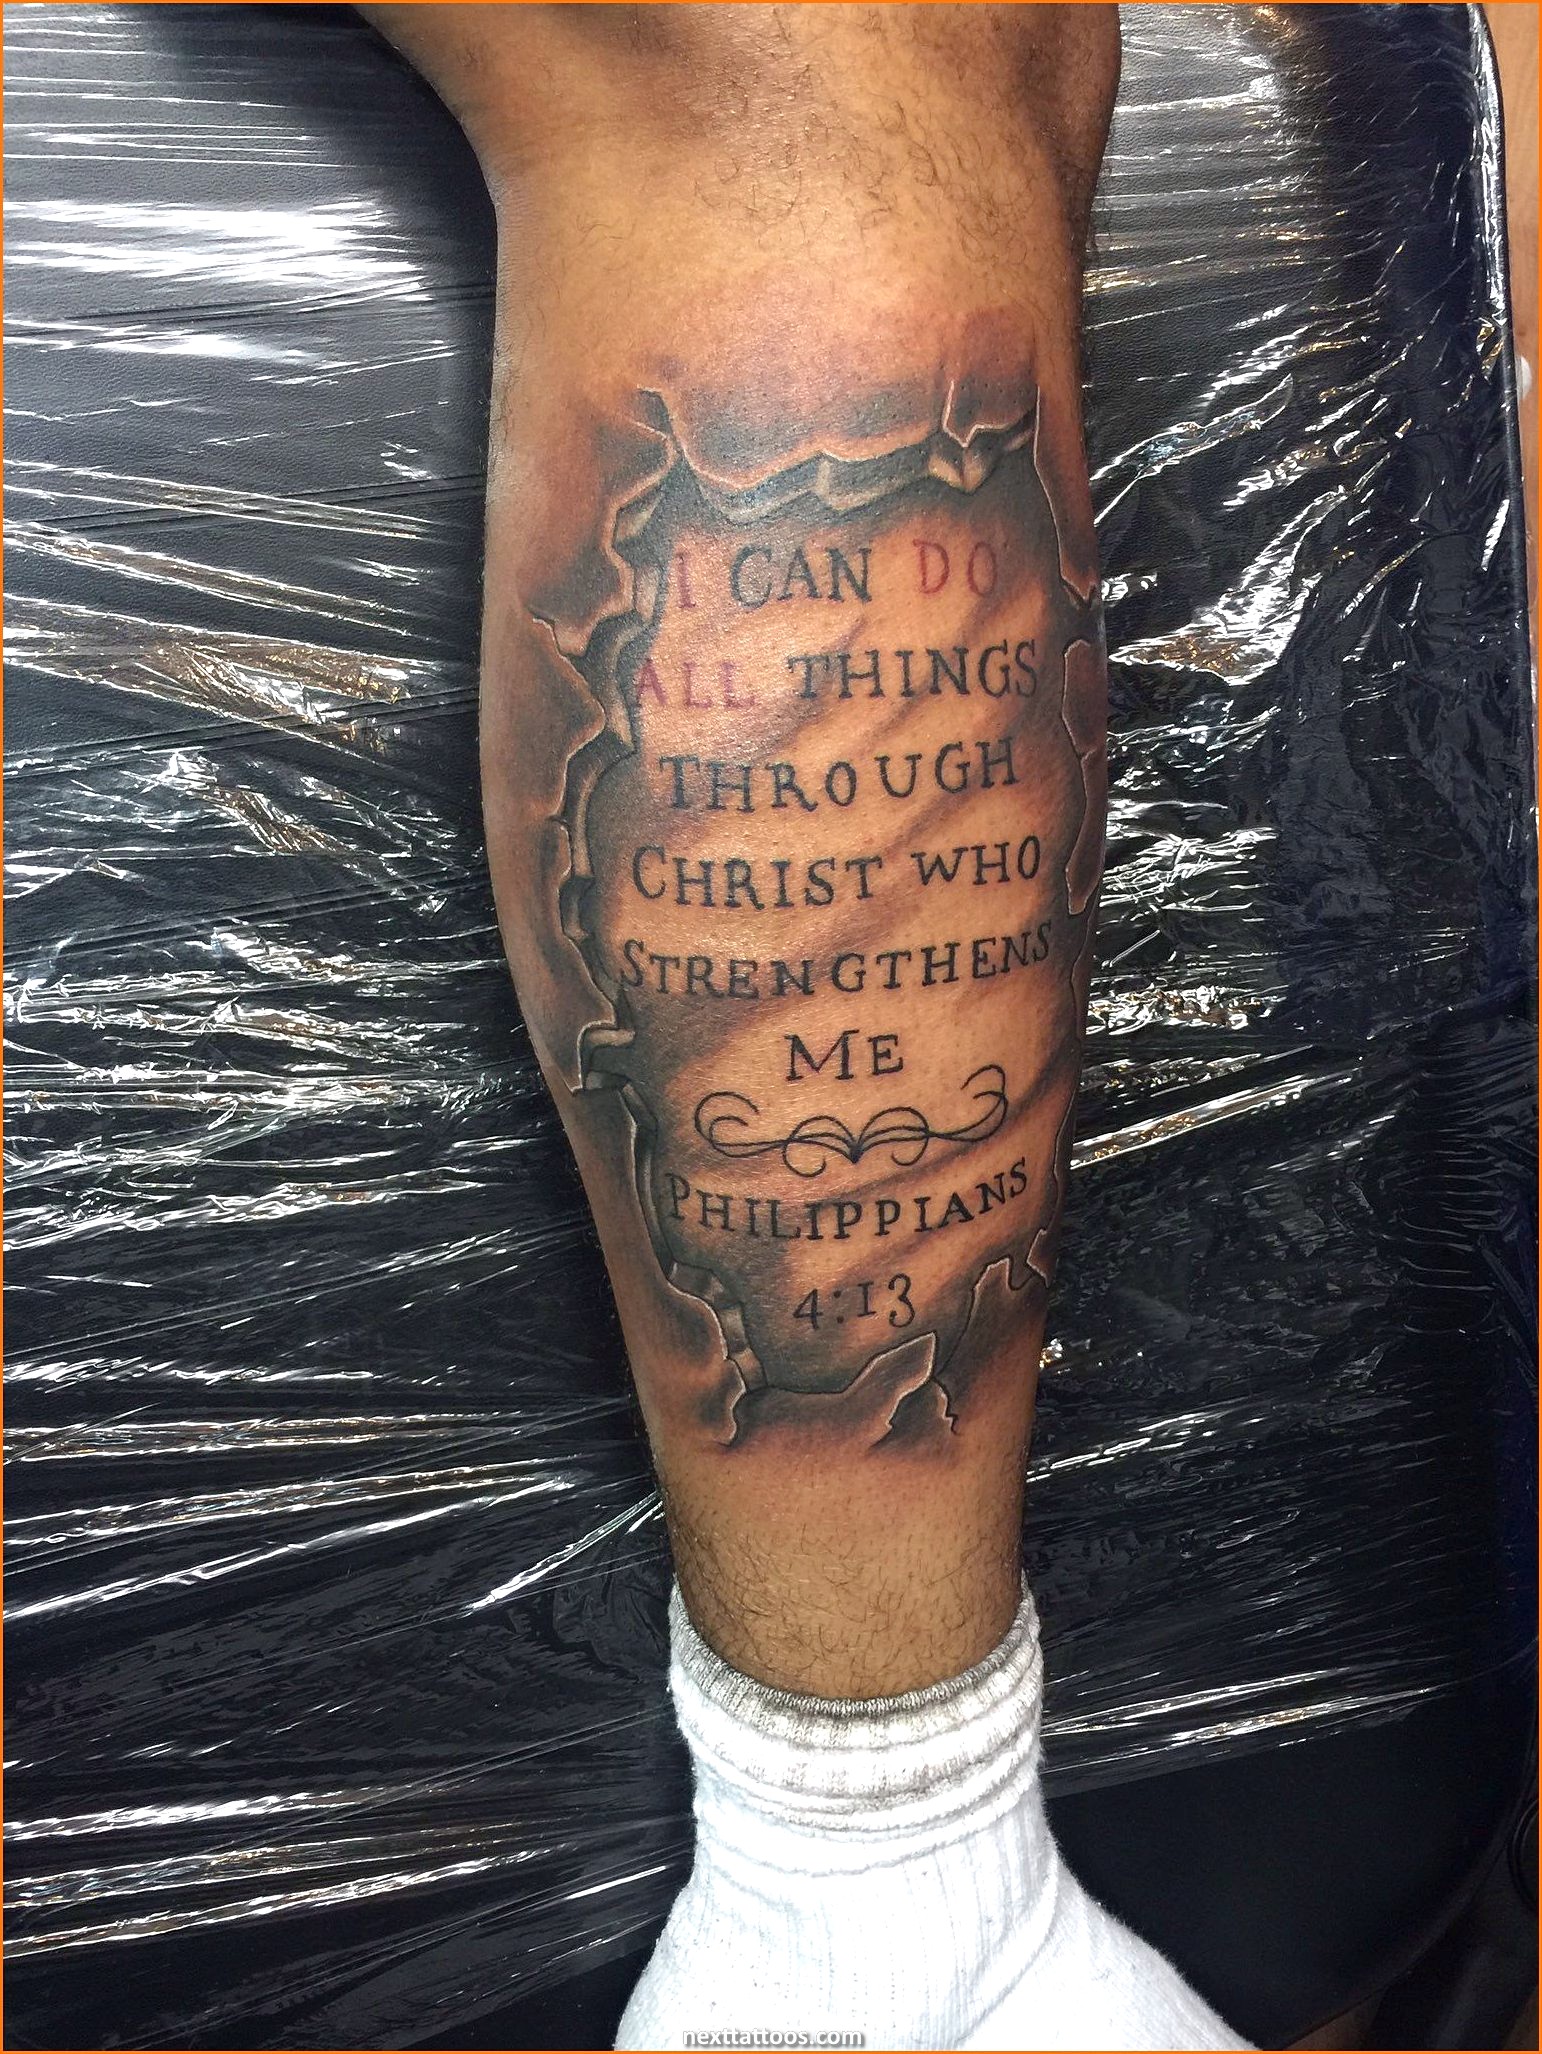 Male Forearm Quote Tattoos and Male Chest Quote Tattoos